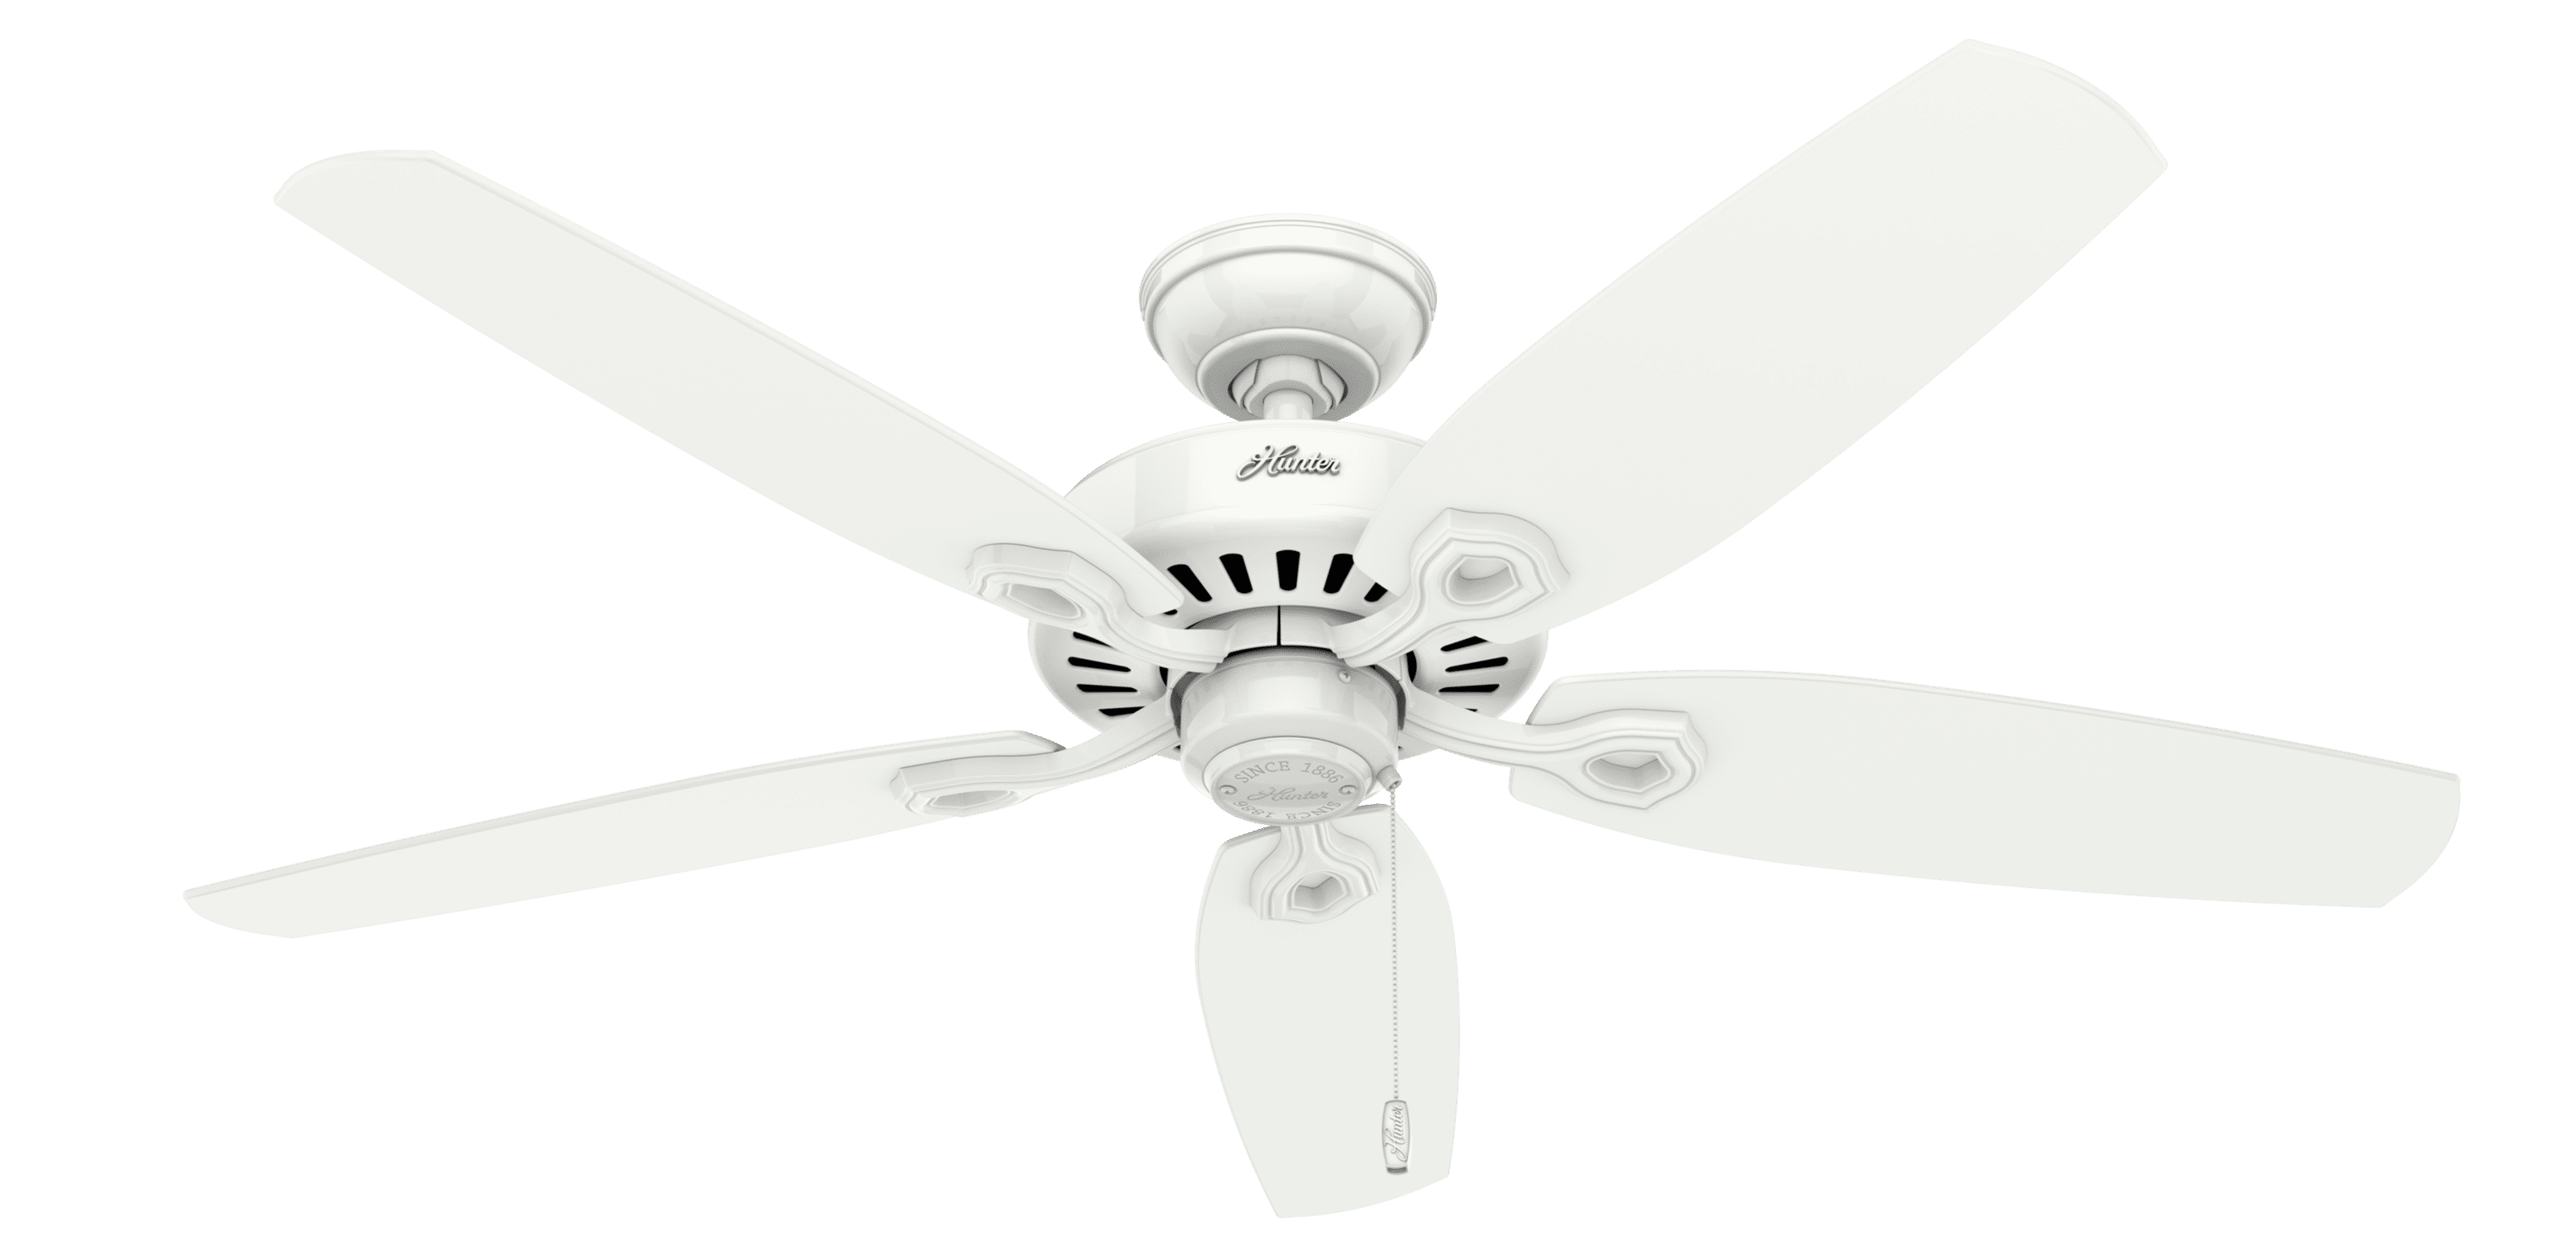 Casablanca Fan 52 inch Snow White Finish Ceiling Fan with 3 Speed Pull Chain 